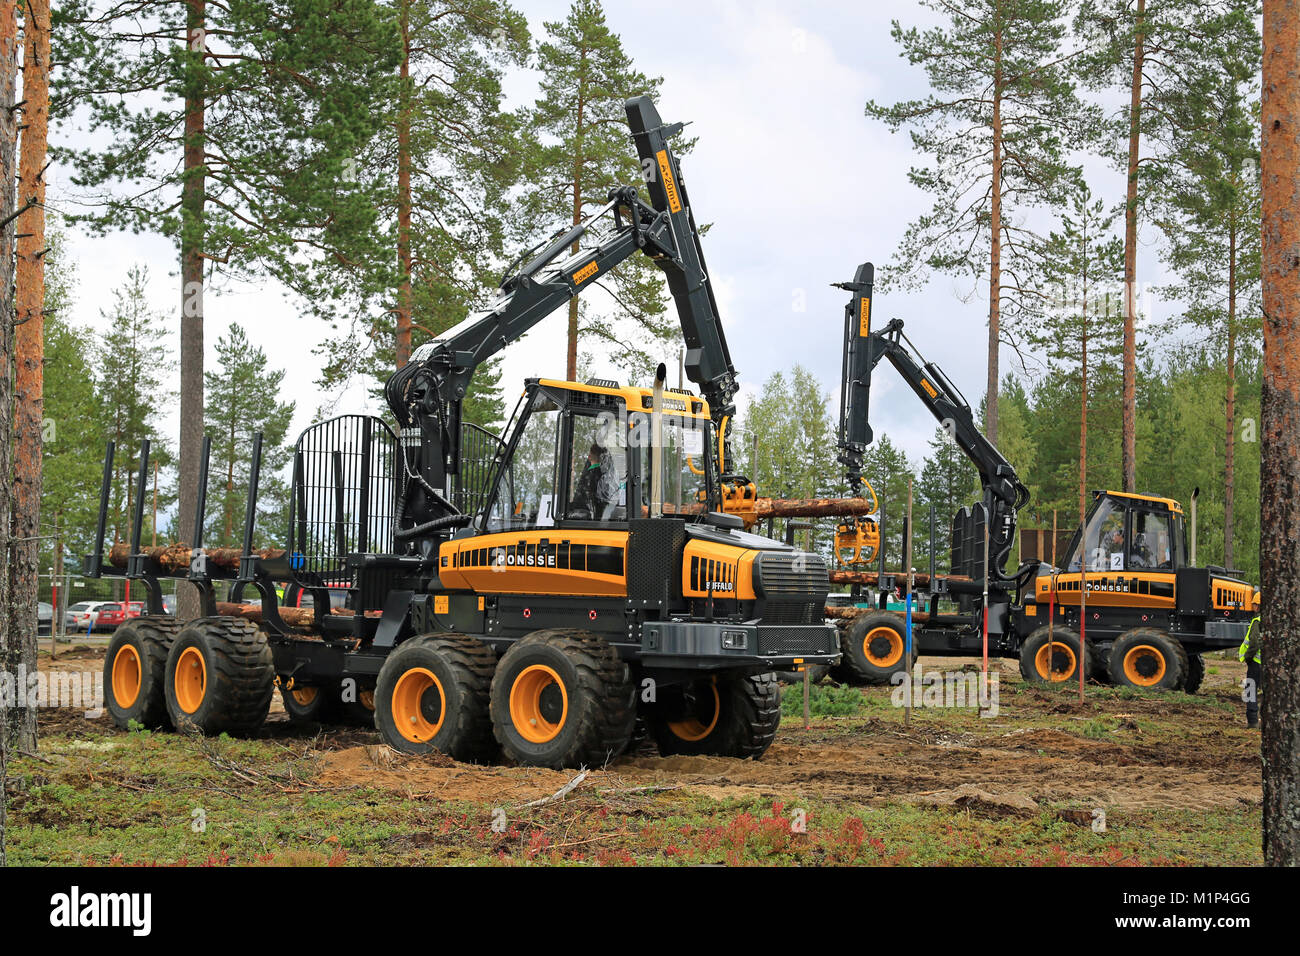 JAMSA, FINLAND - AUGUST 29, 2014: Unidentified professionals take part in the National Forest Machine Operator Competition, held at FinnMETKO 2014. Stock Photo